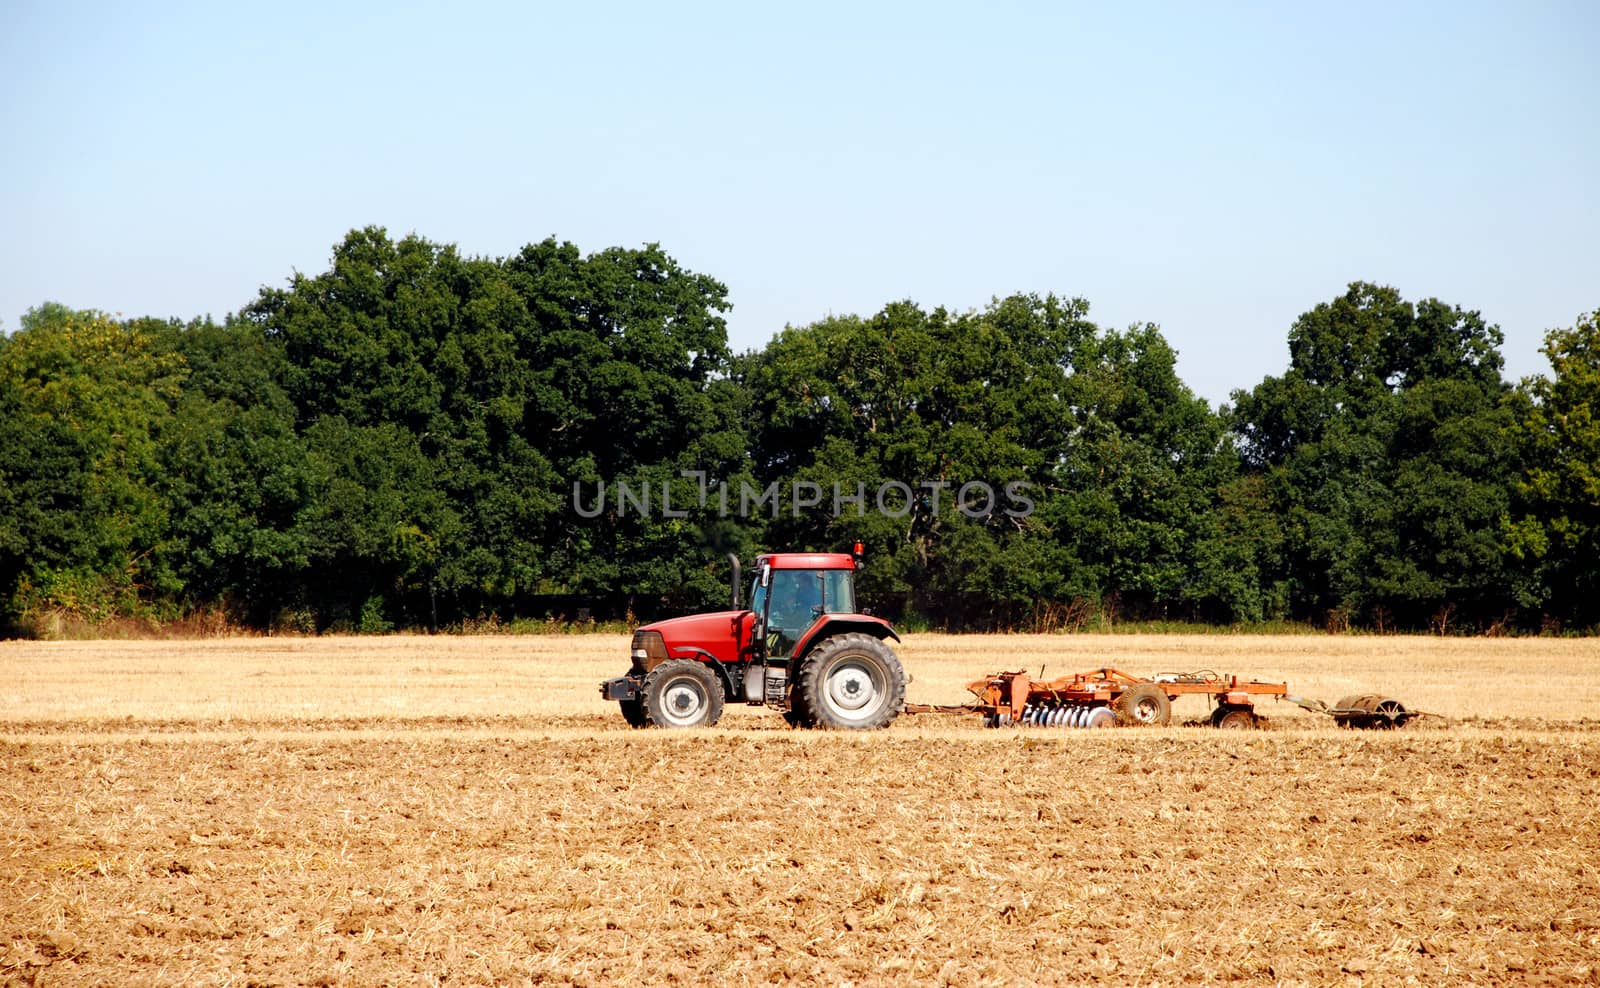 Red tractor and disc harrow breaking up the soil after harvest in a farm field - Kent, England